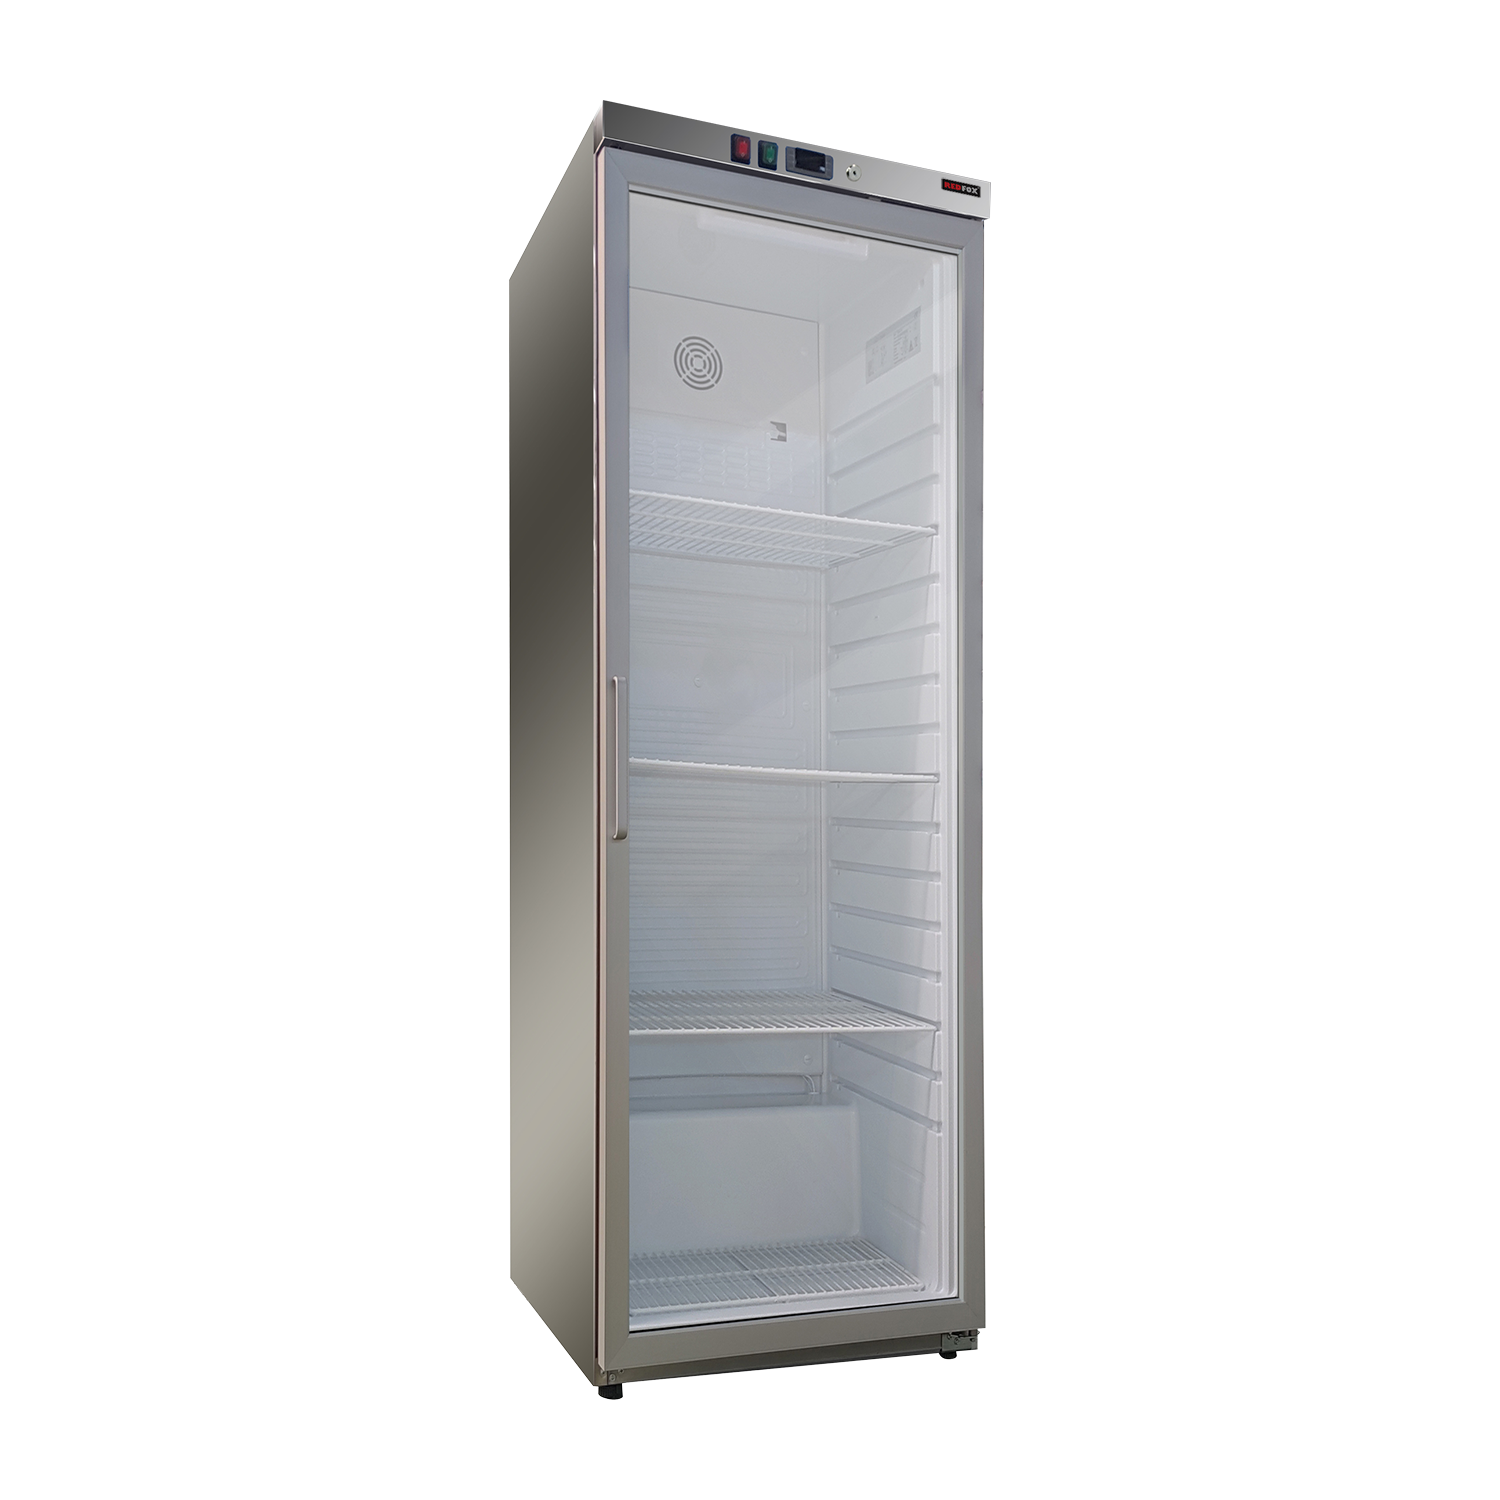 Cooling cabinet 570 l, glass door, stainless steel | REDFOX - DRR 600 GS